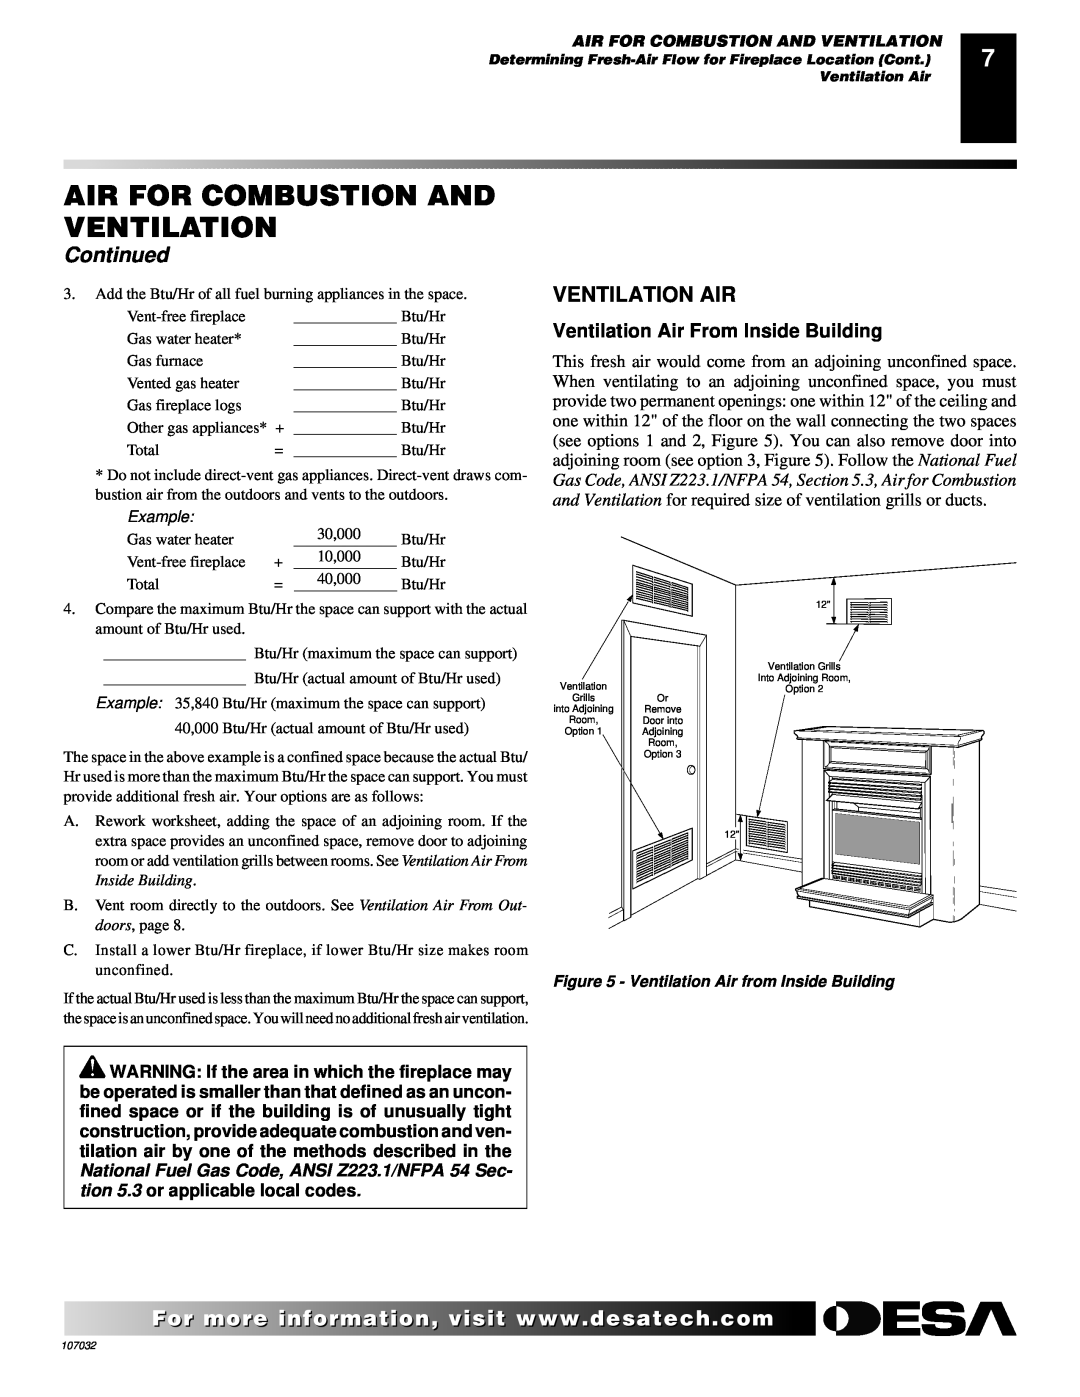 Desa VMH10TPB installation manual Ventilation Air From Inside Building, Air For Combustion And Ventilation, Continued 